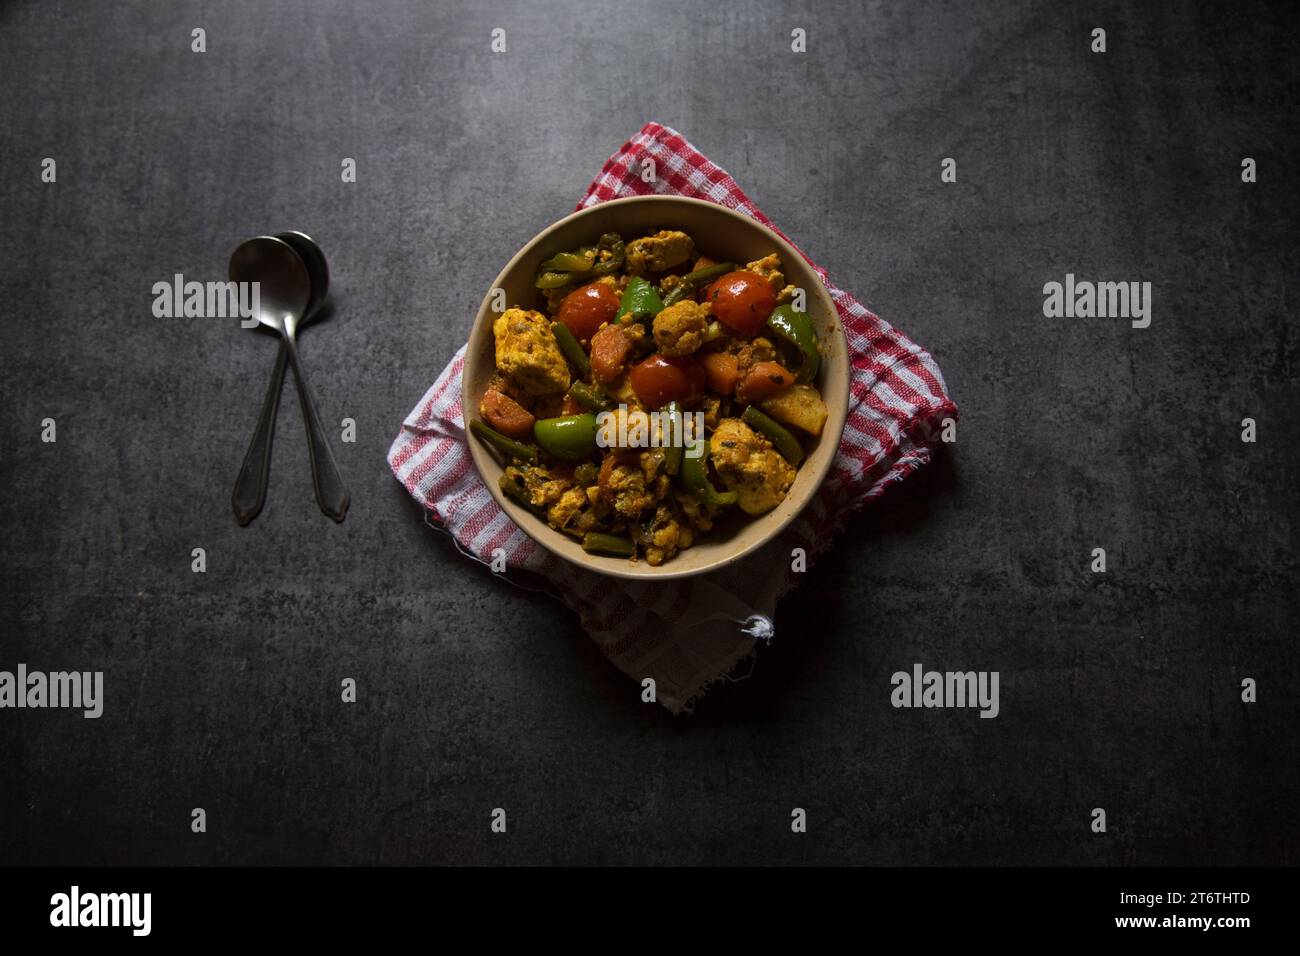 Indian main course dish mixed veg curry prepared with carrots, cauliflower, beans, capsicum and paneer or cottage cheese served in a bowl. Top view Stock Photo